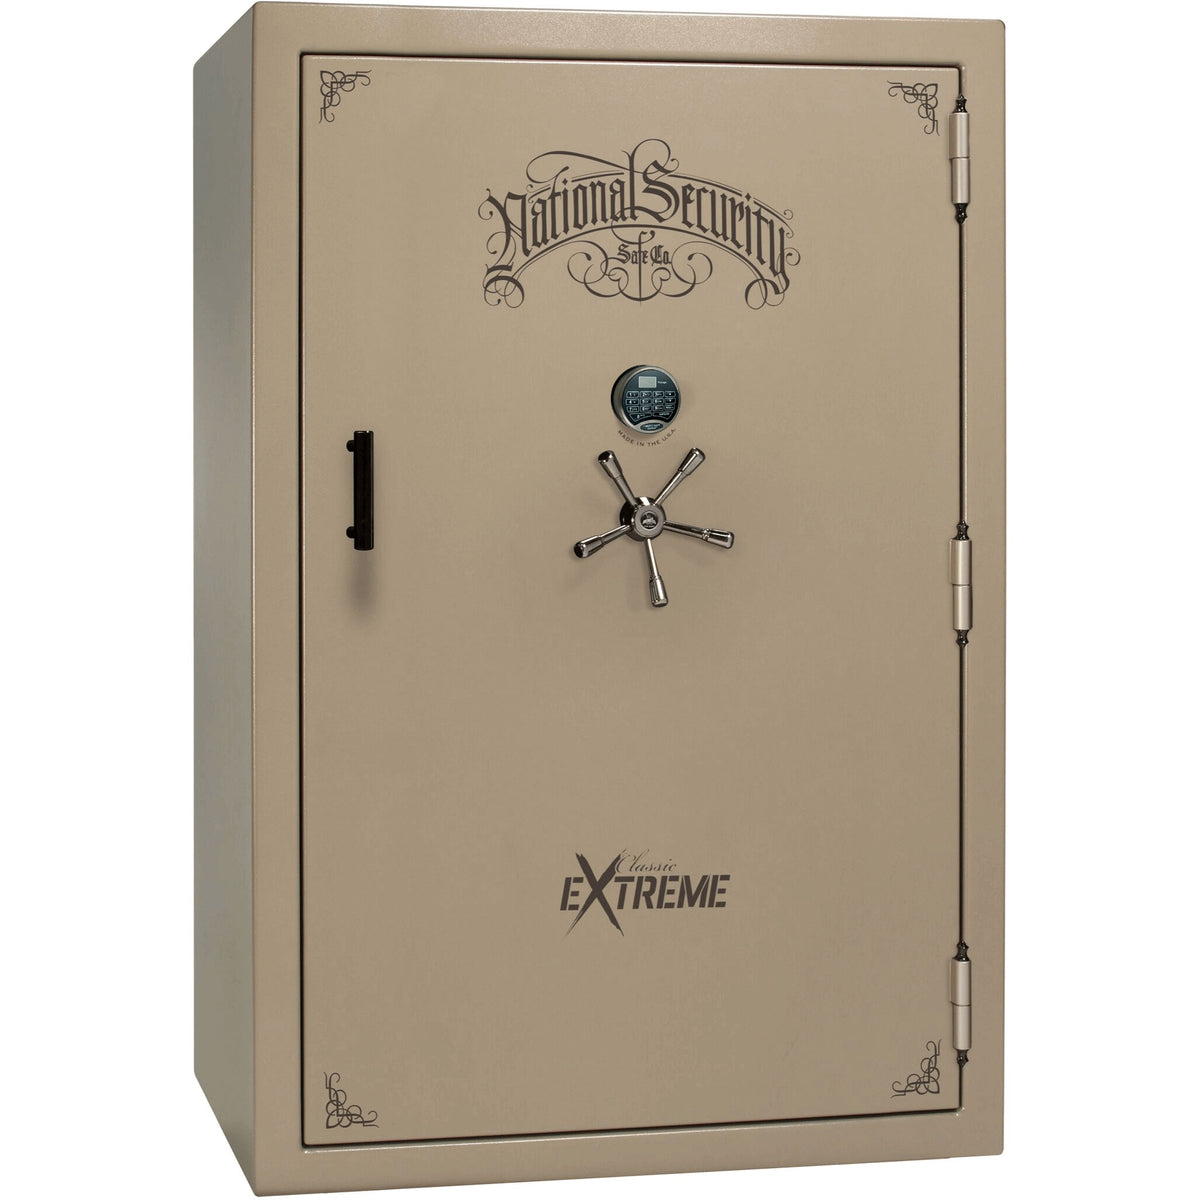 Liberty Classic Select Extreme Wide Body Safe in Champagne Marble with Black Chrome Electronic Lock.